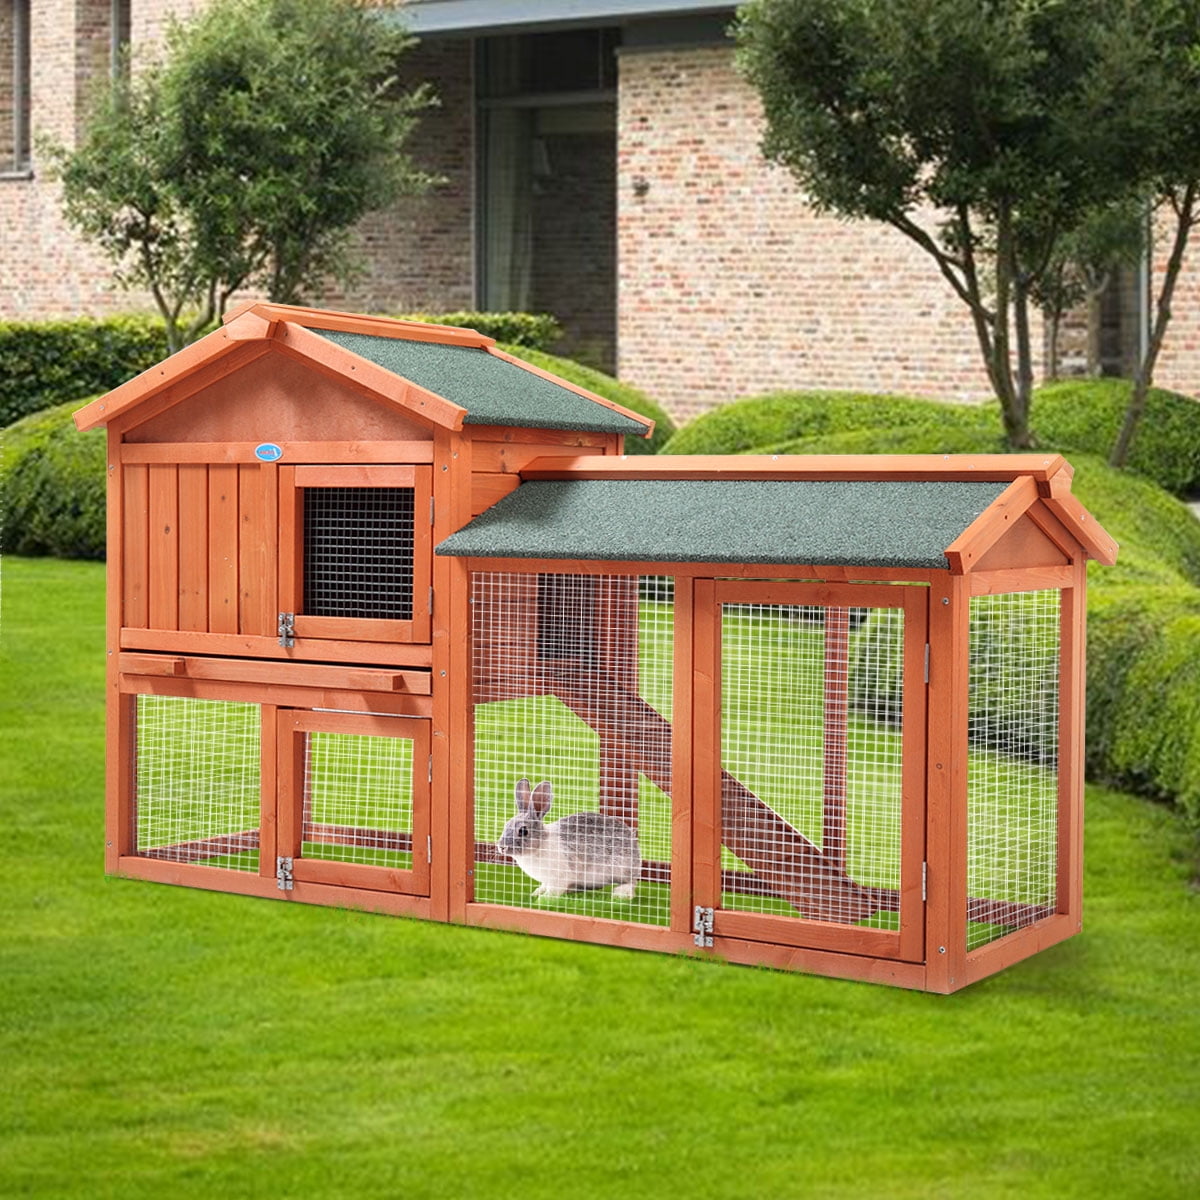 Wooden Chicken Coop Hen Rabbit Small Animal Pet Poultry W/Run Hutch Cage House 